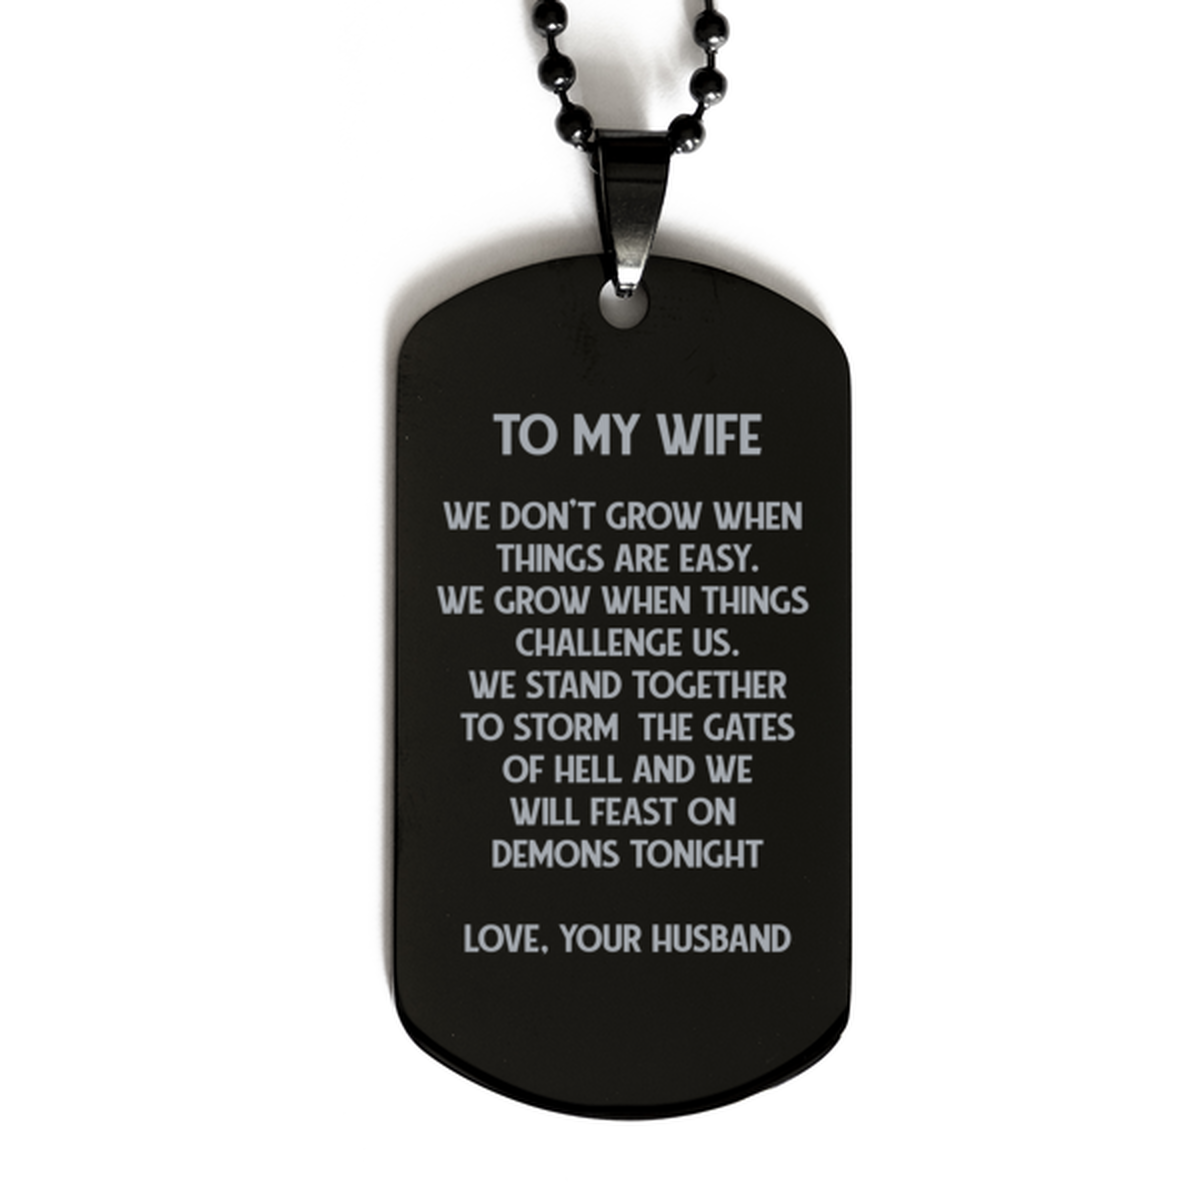 To My Wife Black Dog Tag, We Stand Together , Birthday Gifts For Wife From Husband, Valentines Gifts For Women